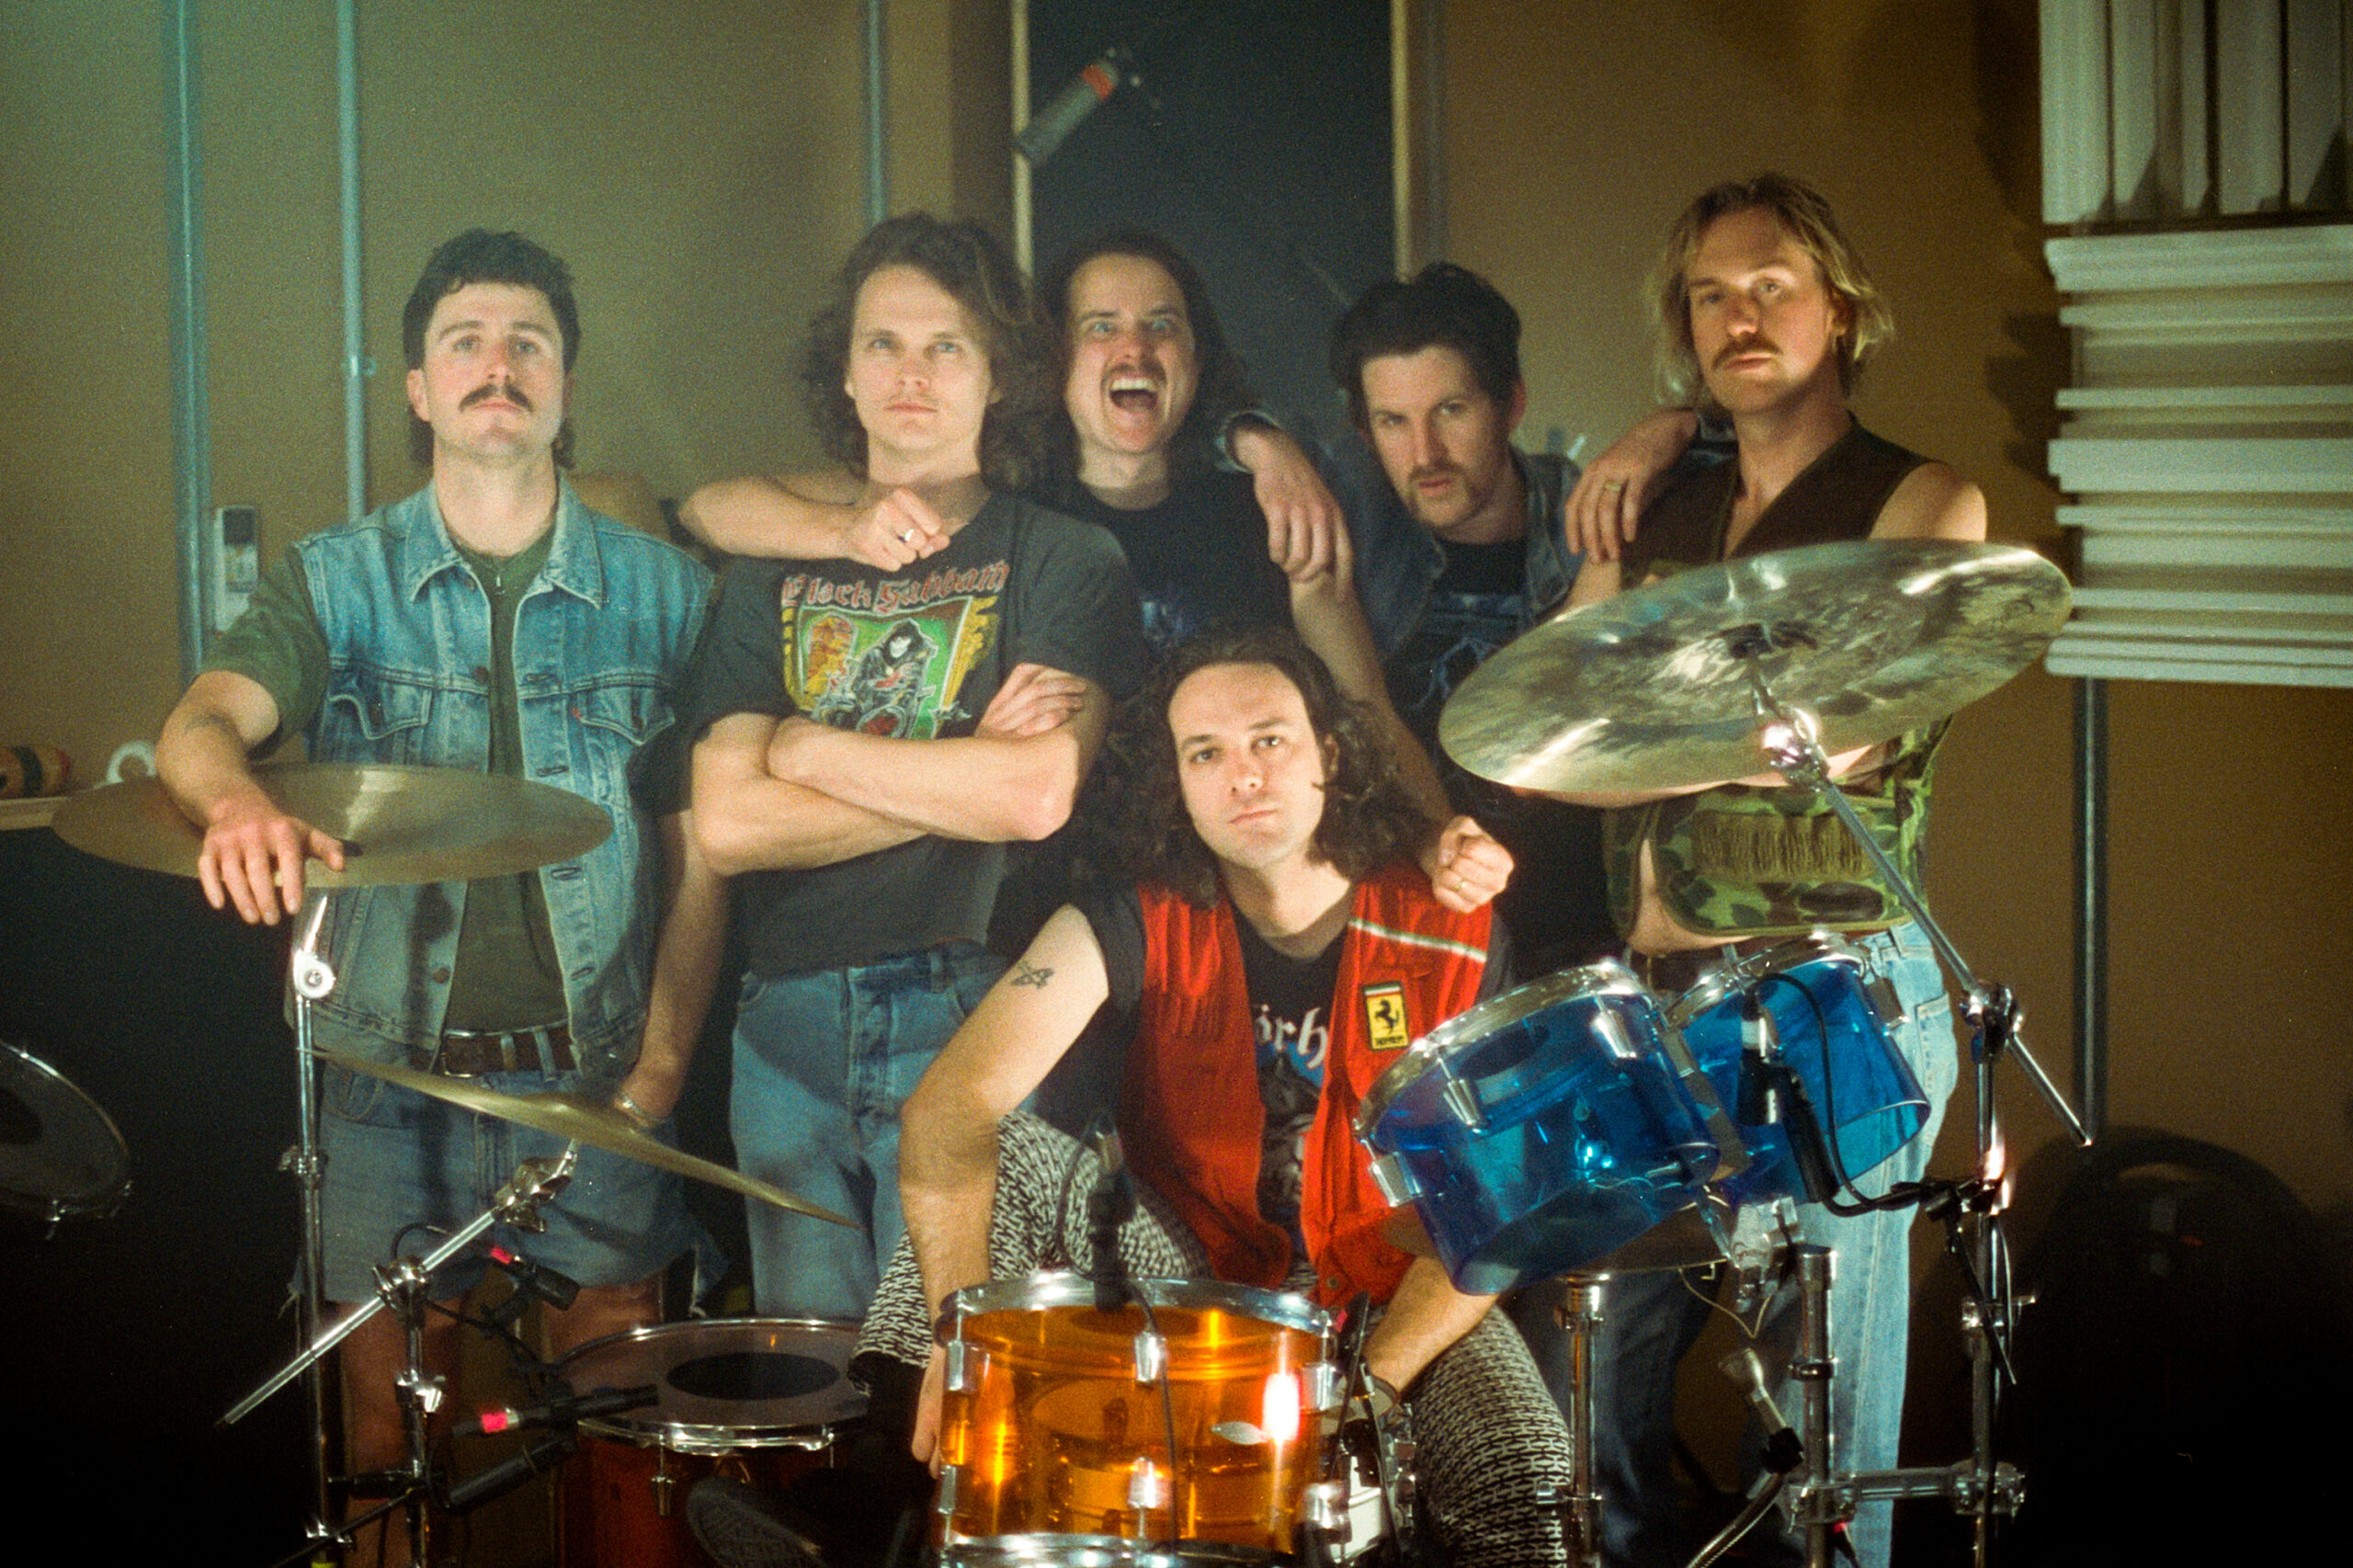 King Gizzard And The Lizard Wizard Wraps U.S. Tour With Biggest Show To Date